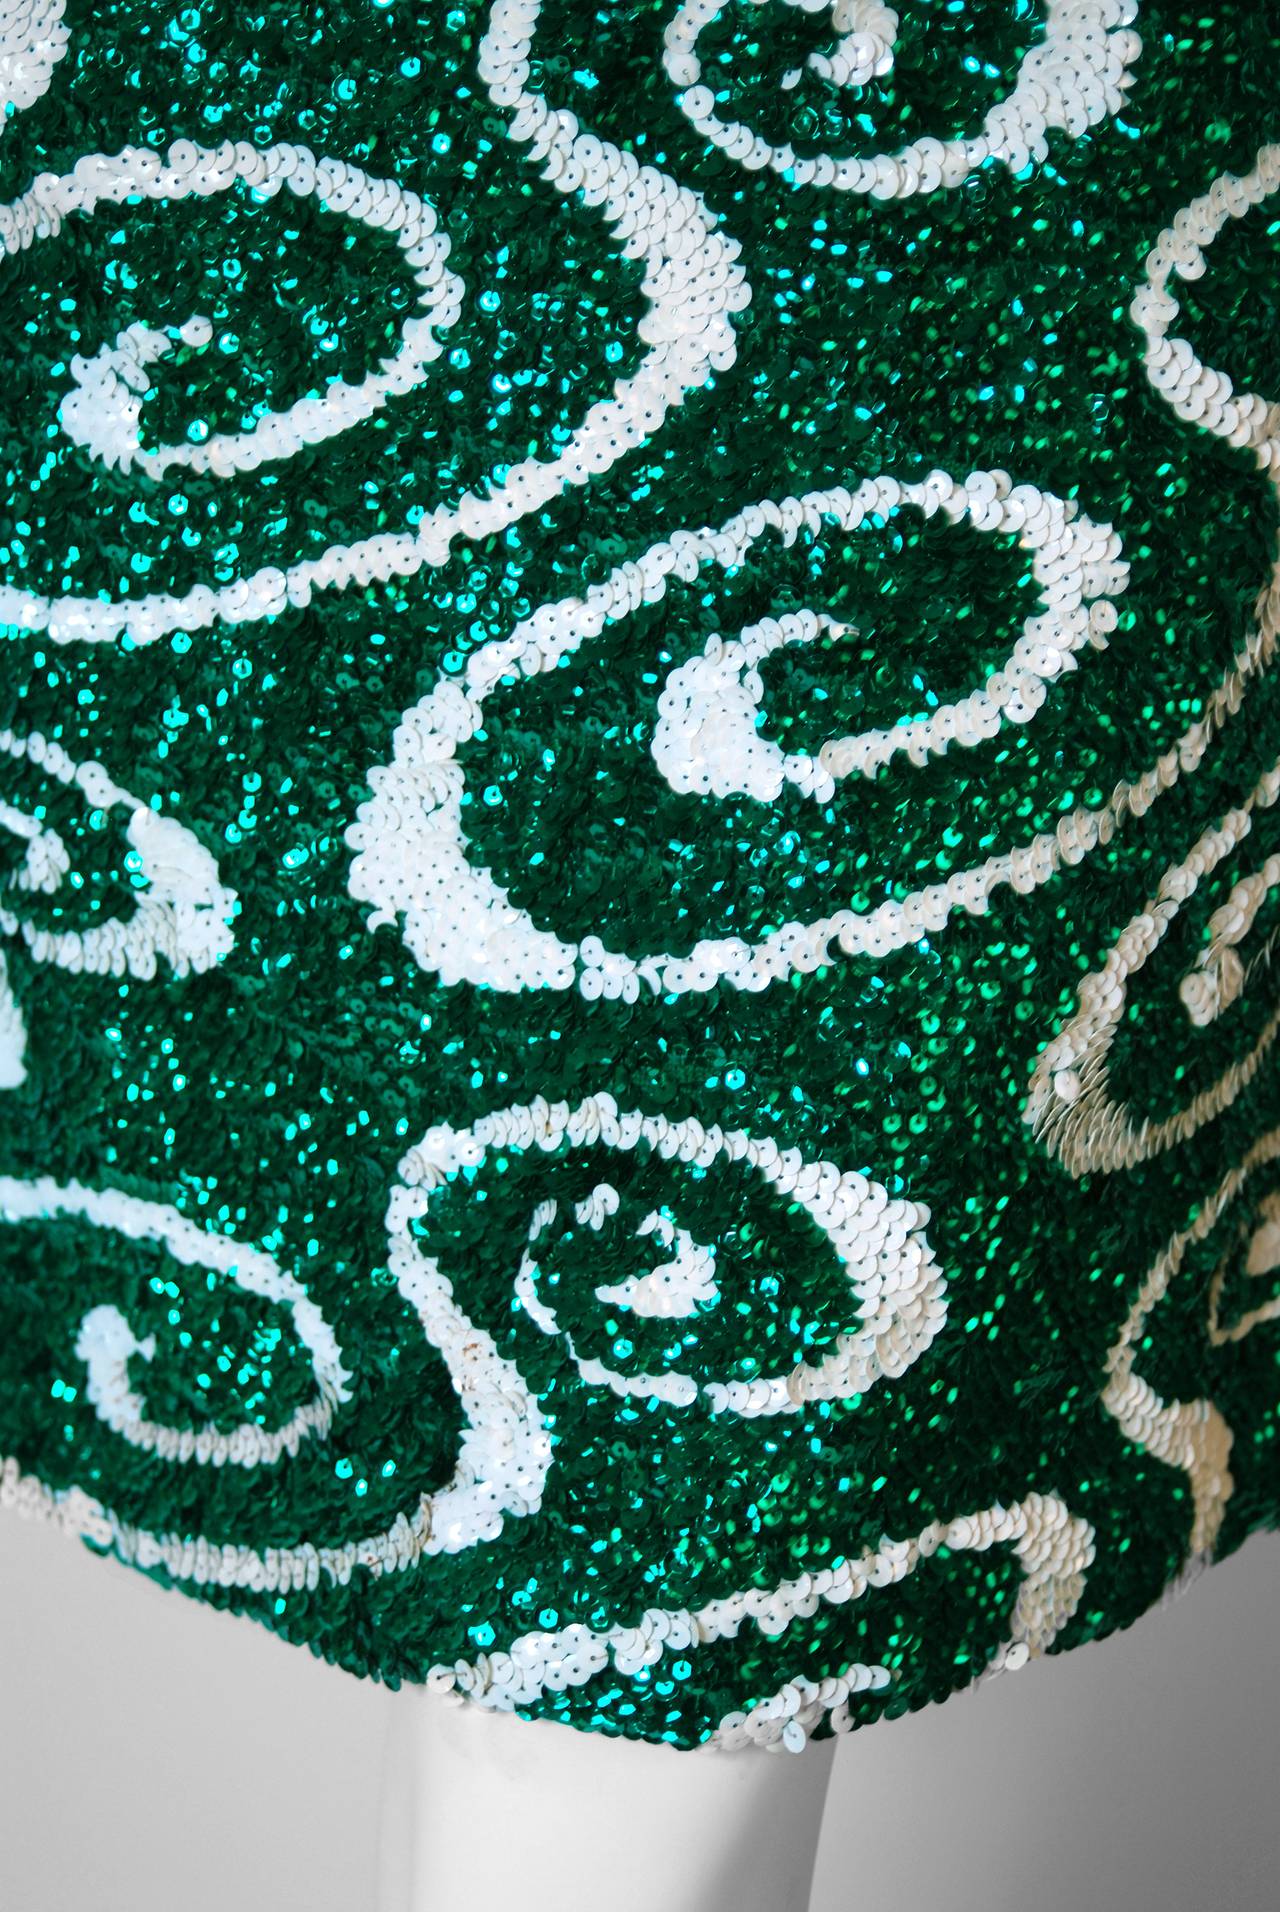 Black 1960's Emerald-Green & White Sequin Abstract-Swirls Wool Mod Cocktail Dress